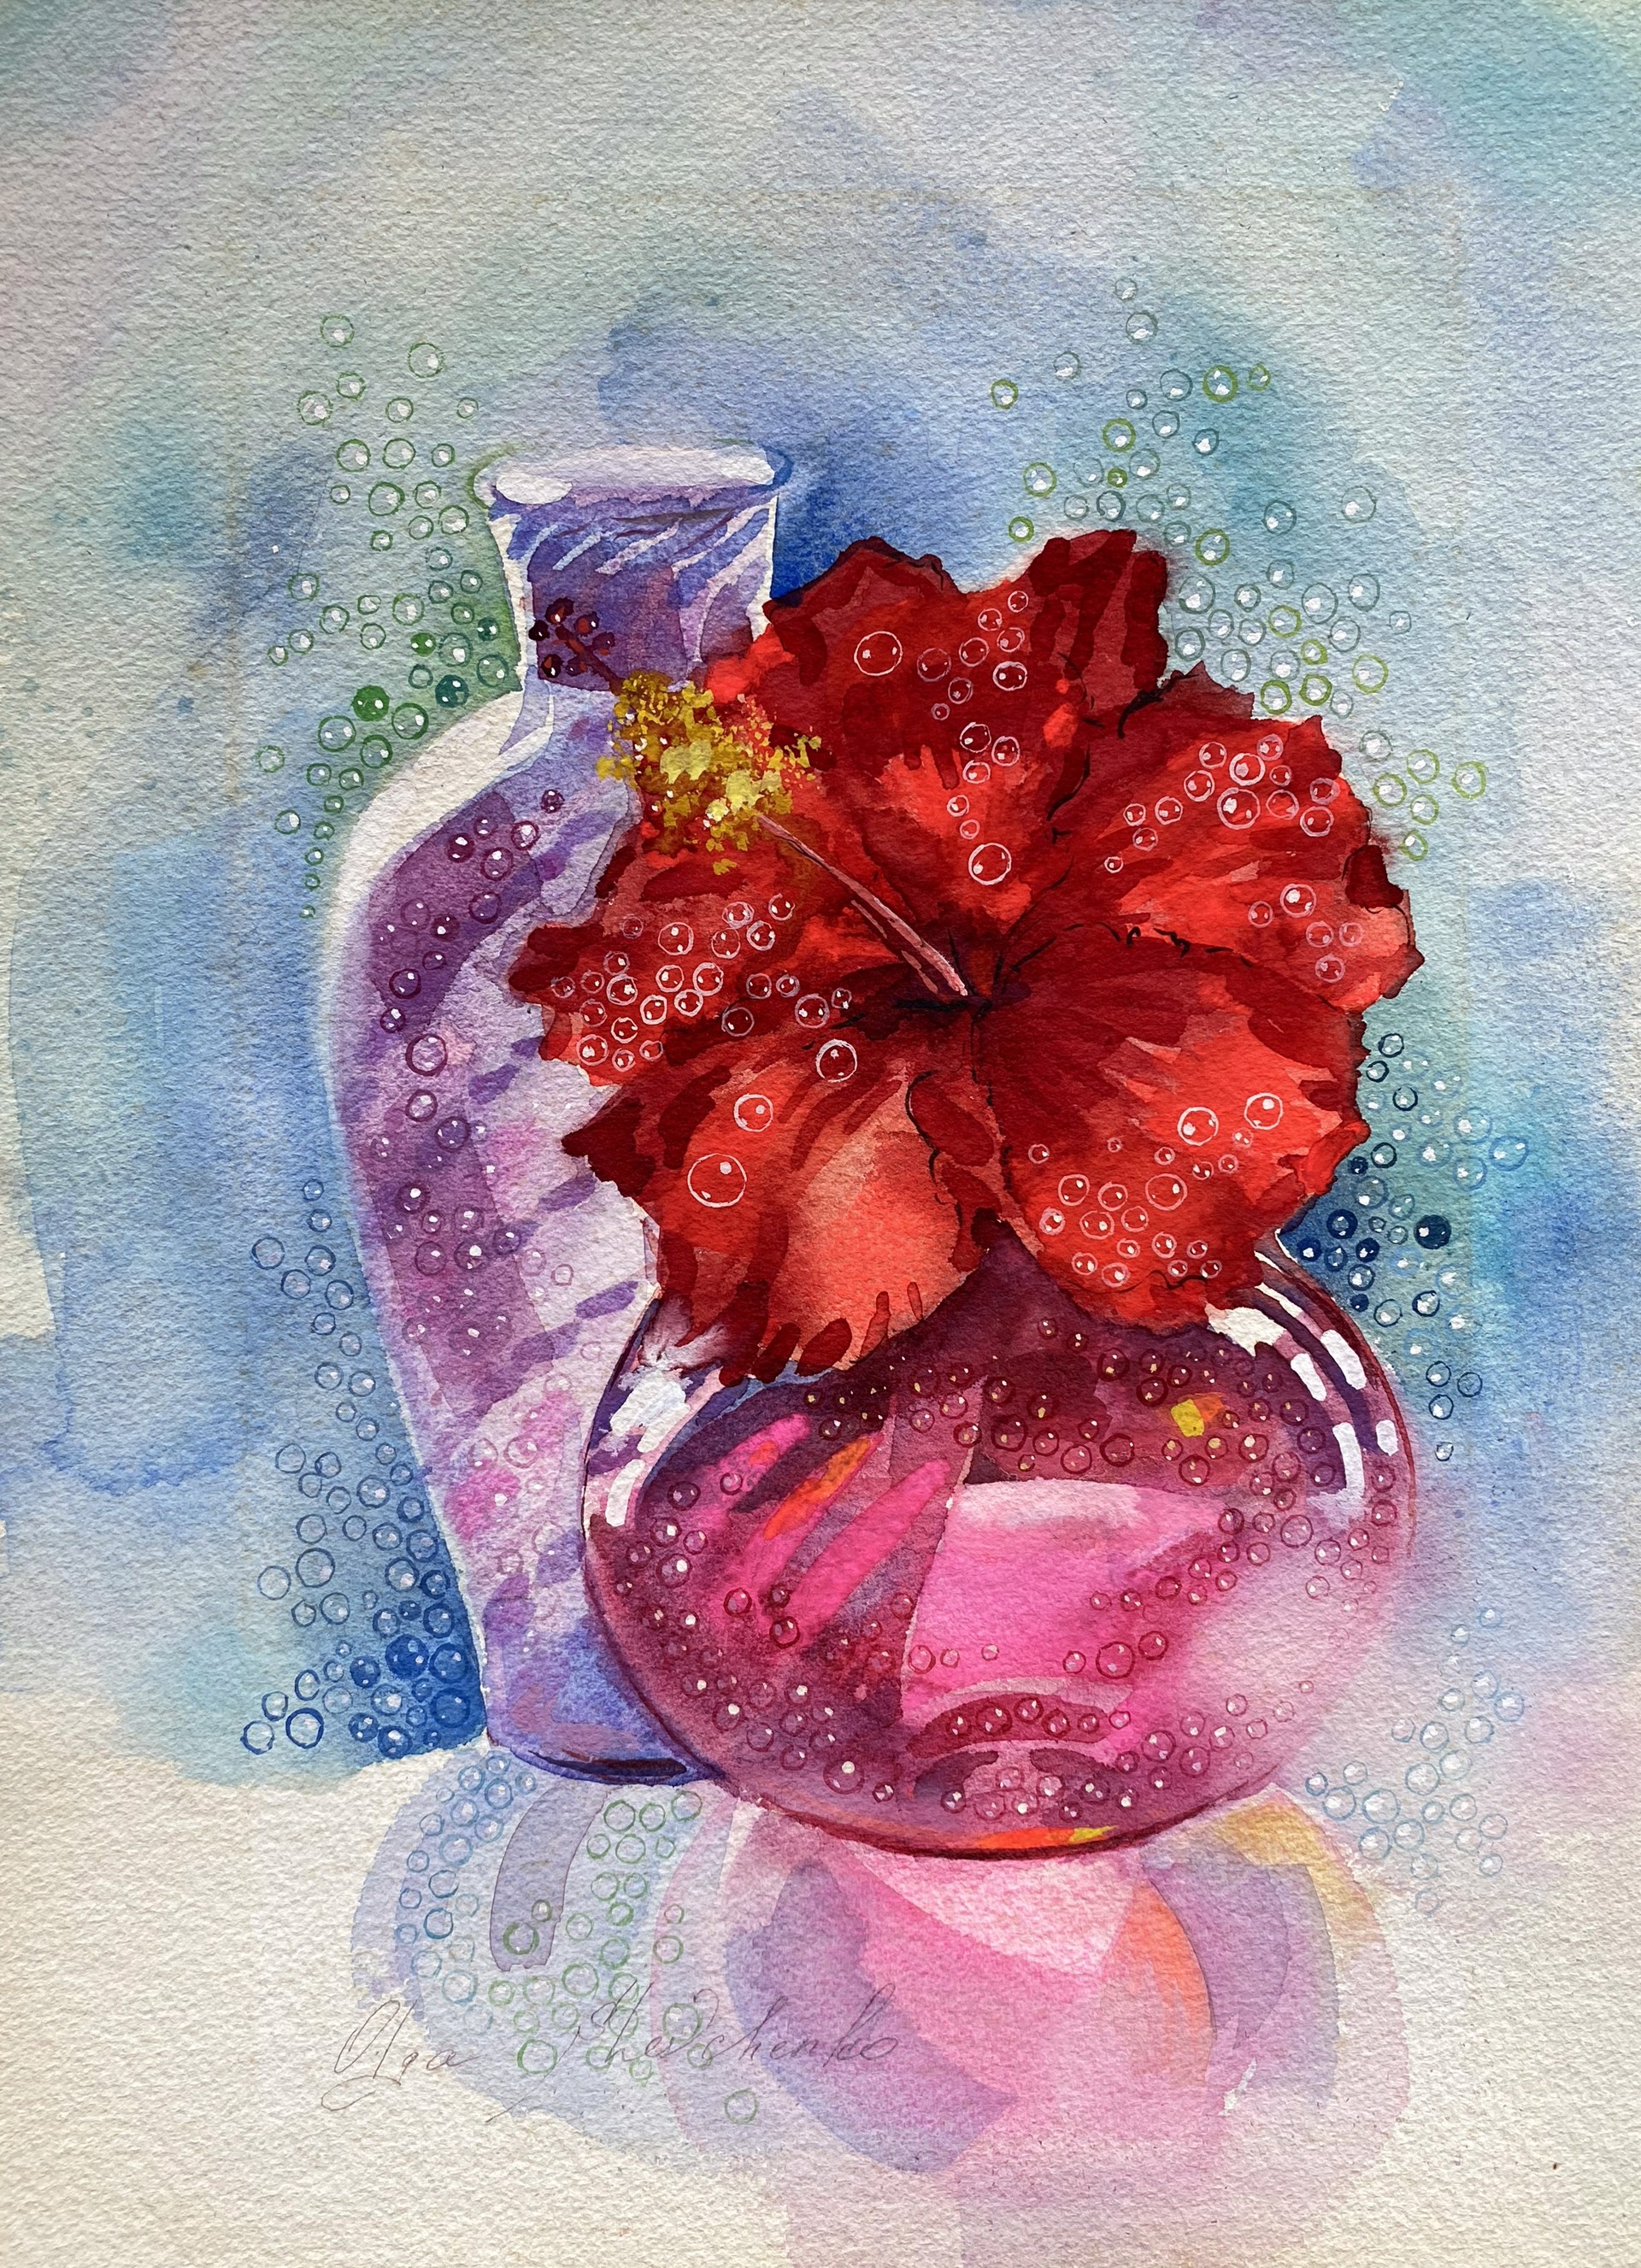 Still Life with Red Hibiscus by Olga Shevchenko